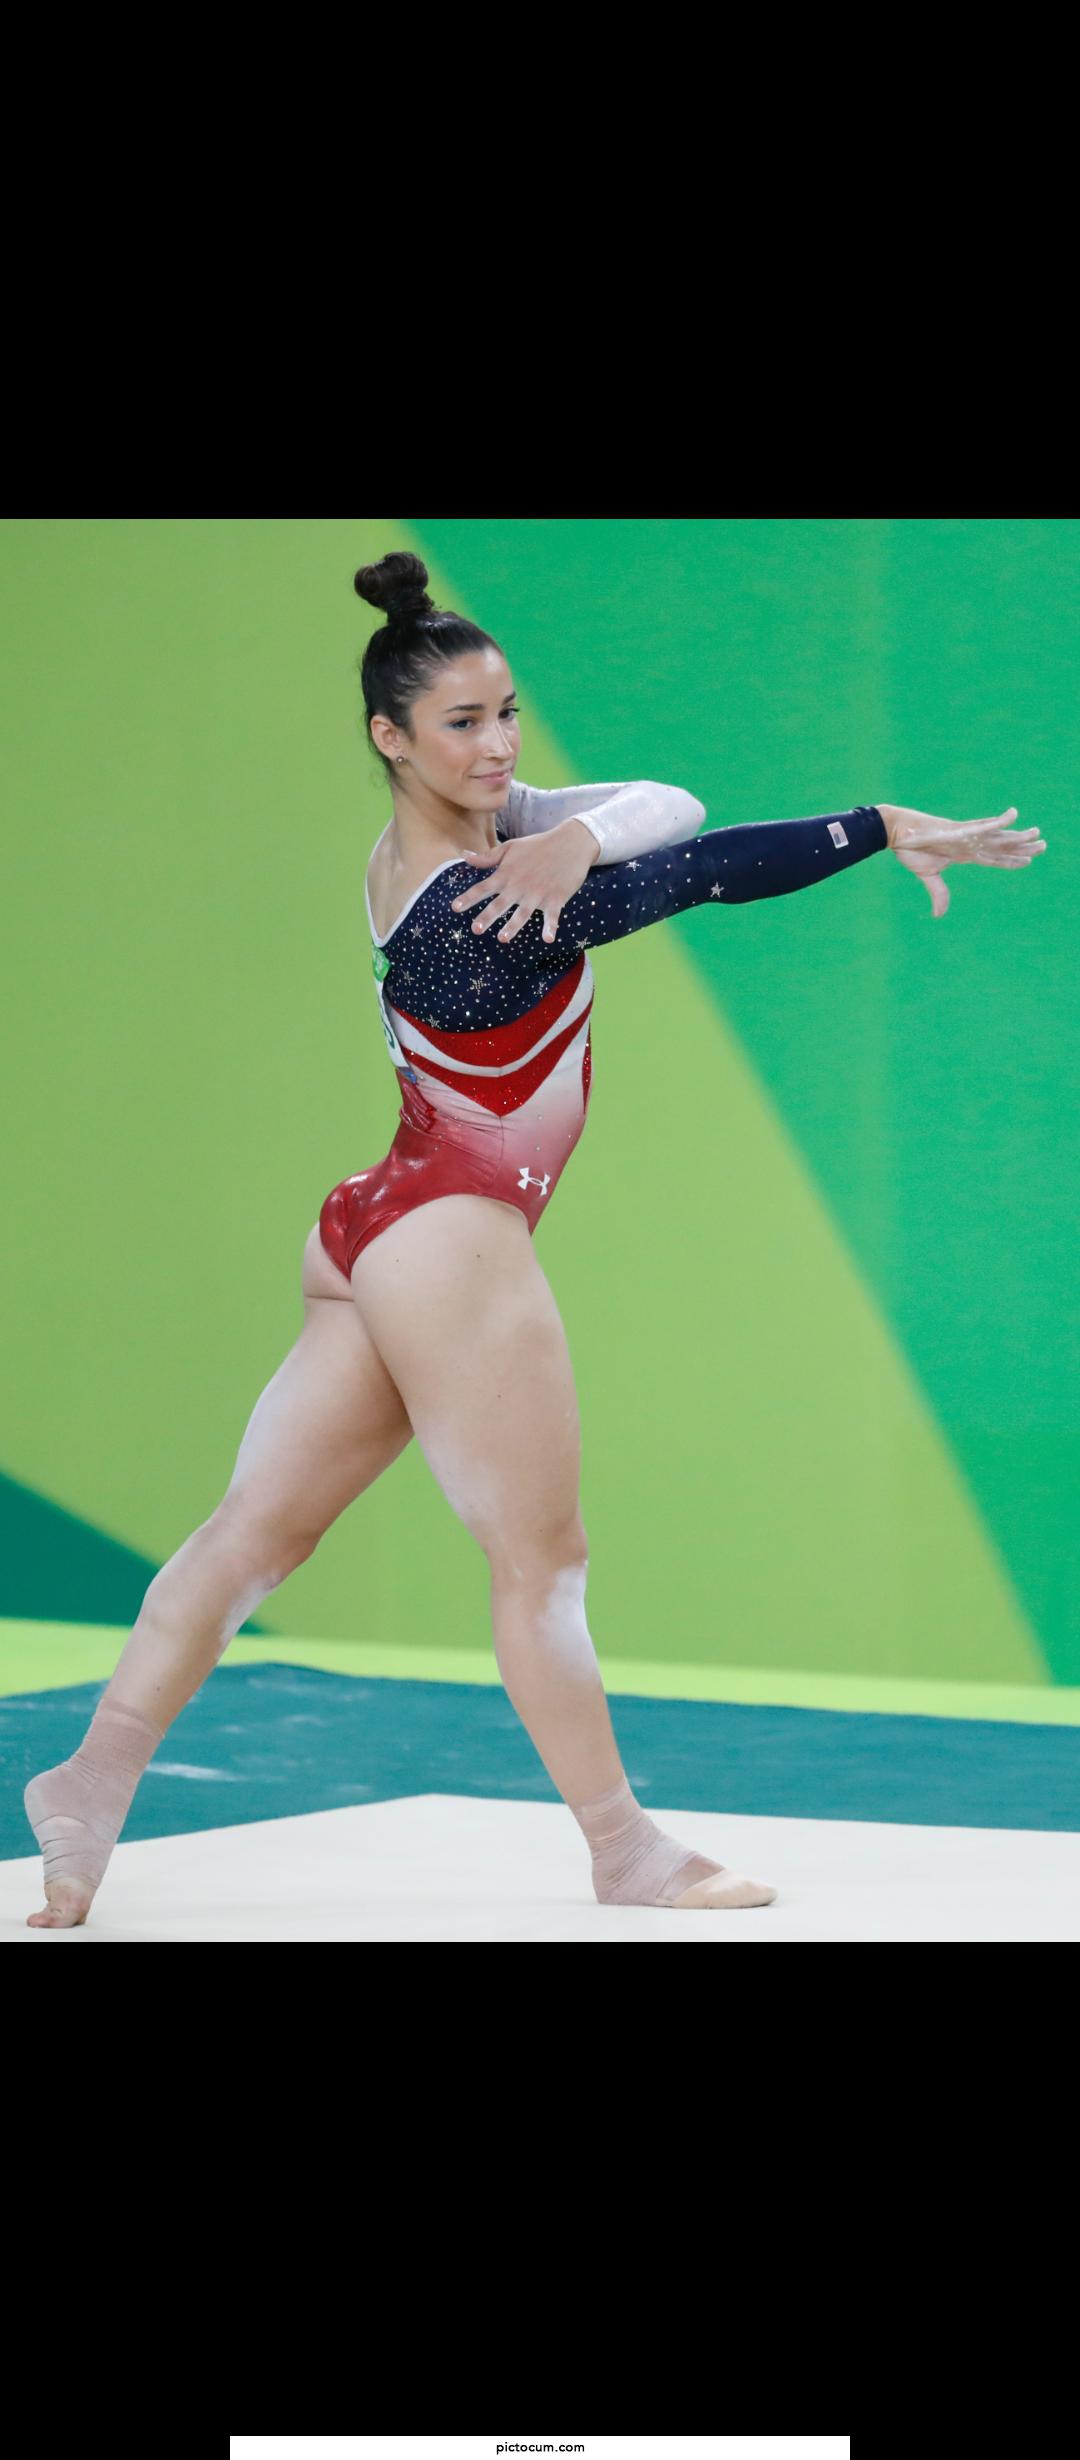 Look at the fucking ass Aly Raisman has on her!